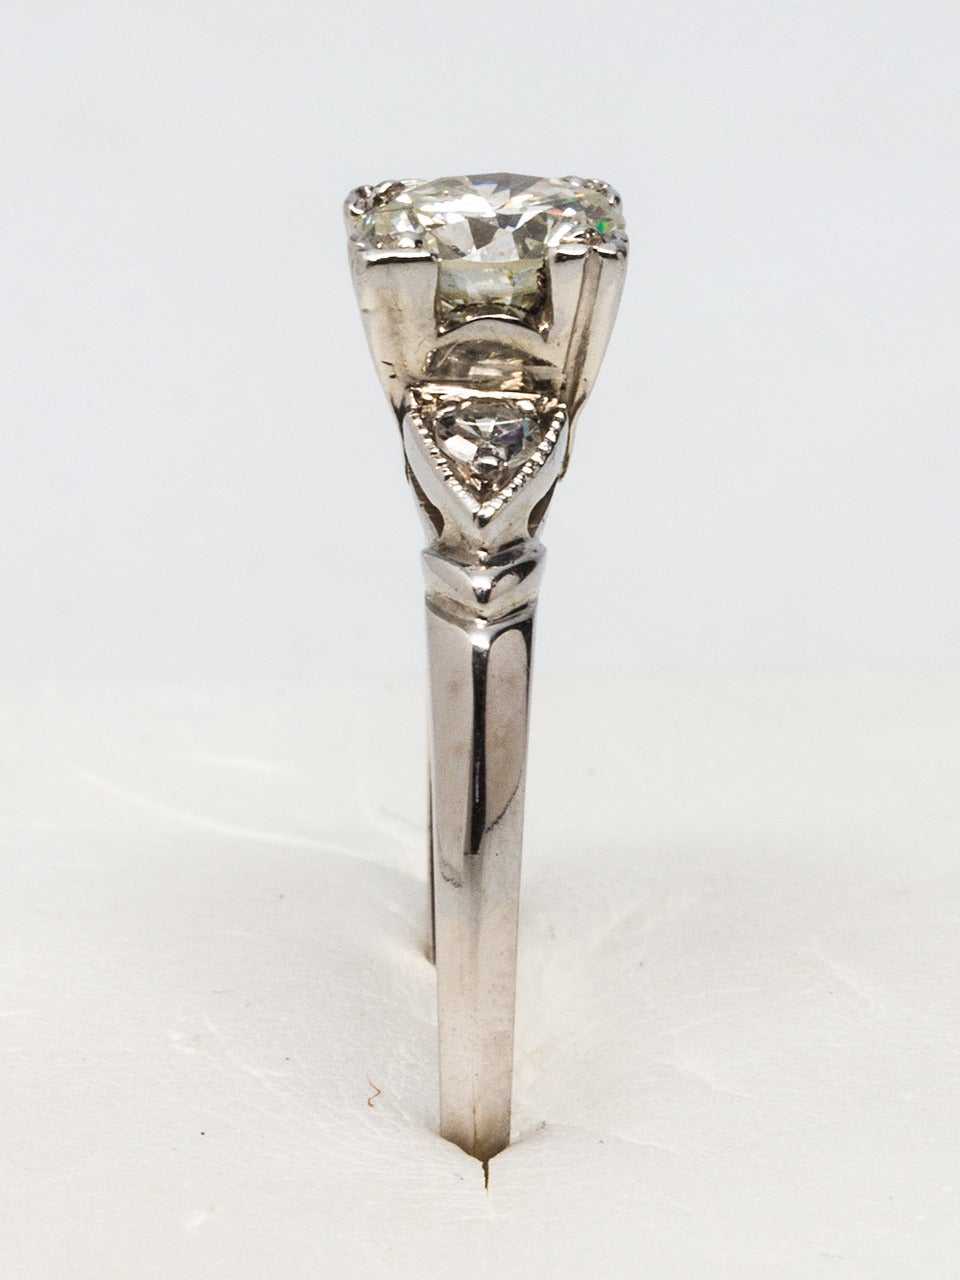 Platinum setting featuring an approximately 0.85 carat Round Brilliant Cut diamond, J color and SI2 clarity. Flanked by two single cut side stones in triangular settings, sculpted detail on shank. Size 6 Circa 1950s.

As a special offering for our